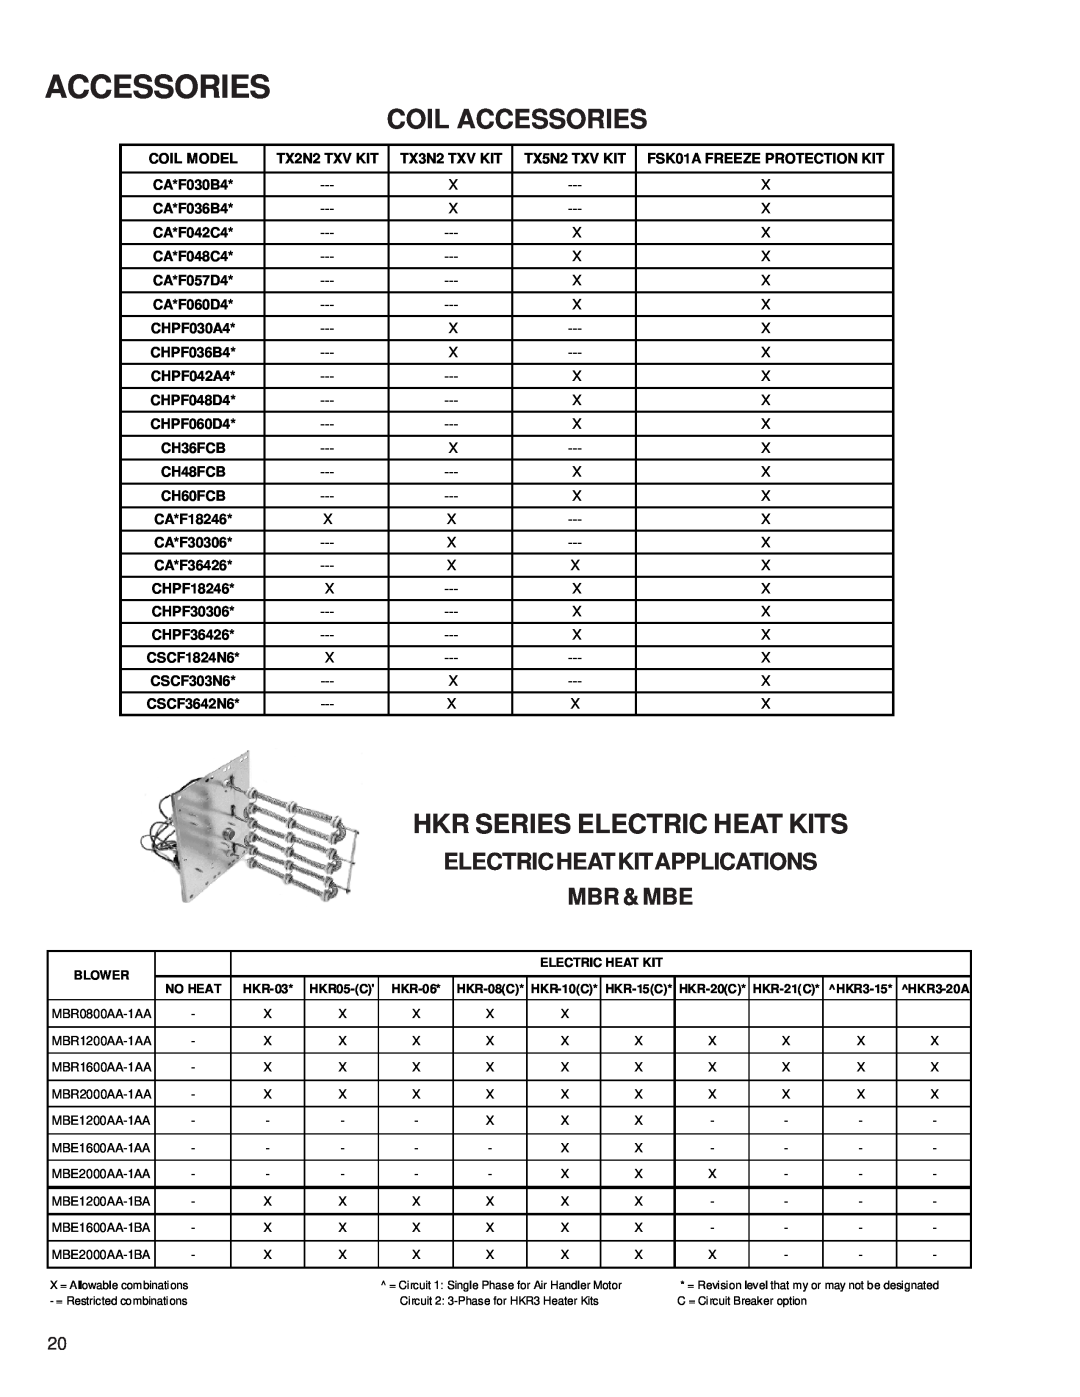 Goodman Mfg RT6100004R13 manual Coil Accessories, Hkr Series Electric Heat Kits, Electricheatkitapplications, Mbr & Mbe 